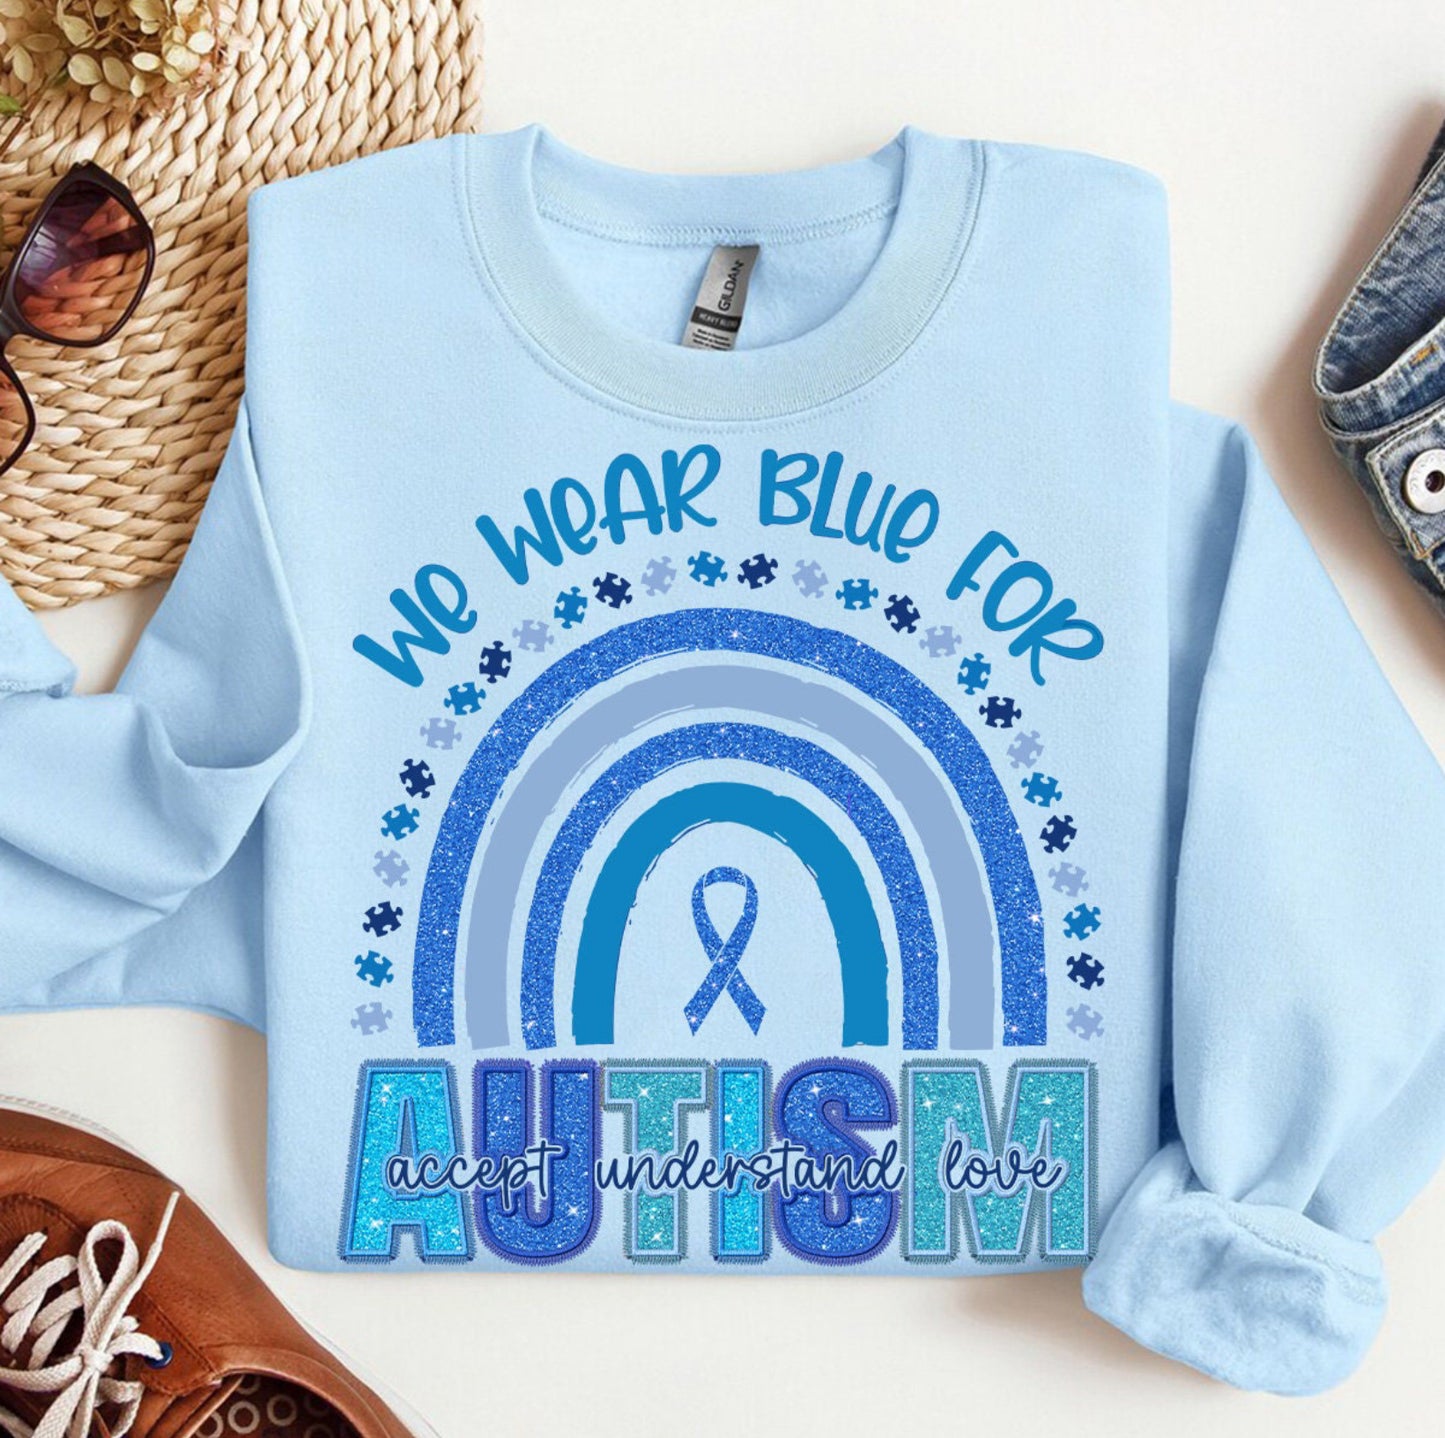 Wear Blue for Autism Top